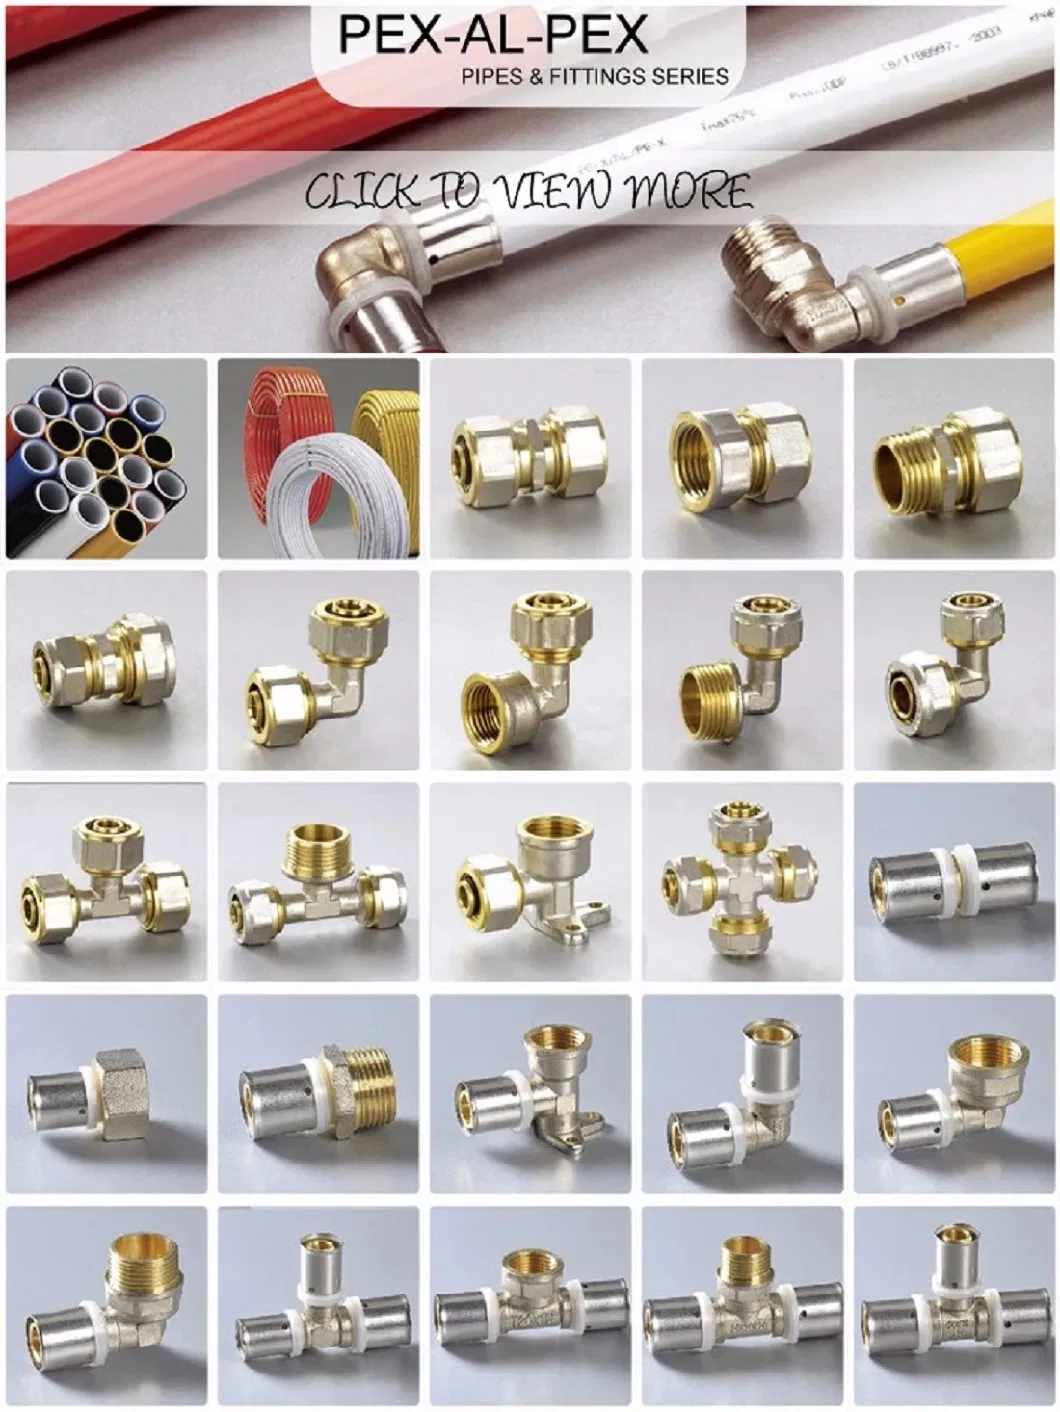 1/2-Inch by 1/2-Inch Straight Connector Plumbing Fitting, Push Fit Pex Fittings with Disconnect Clip, Push-to-Connect Copper, CPVC